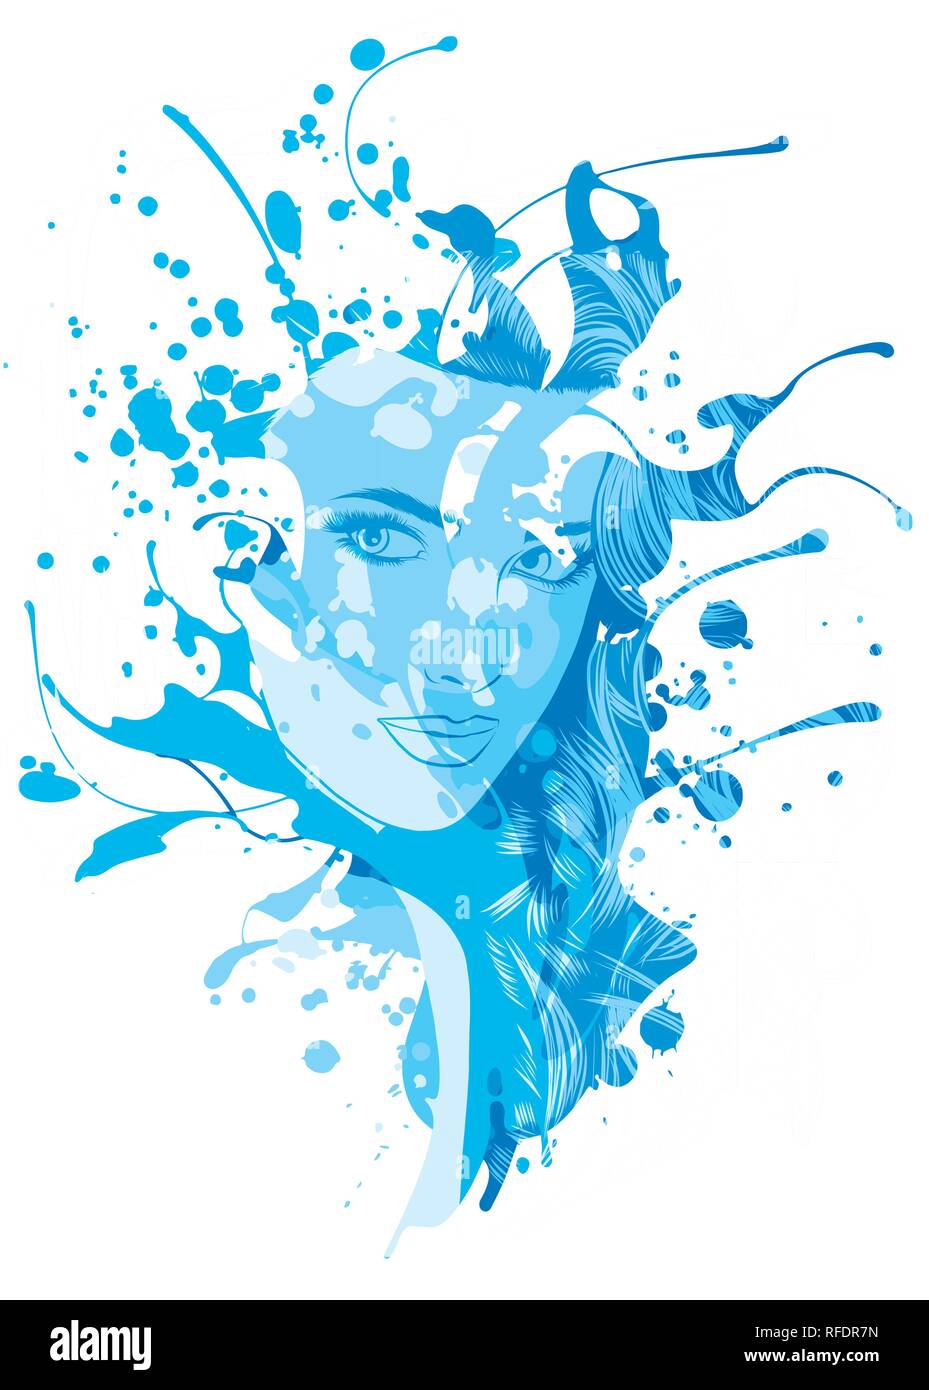 Sad girl with blue hair. Vector illustration on abstract background. Print for T-shirt Stock Vector